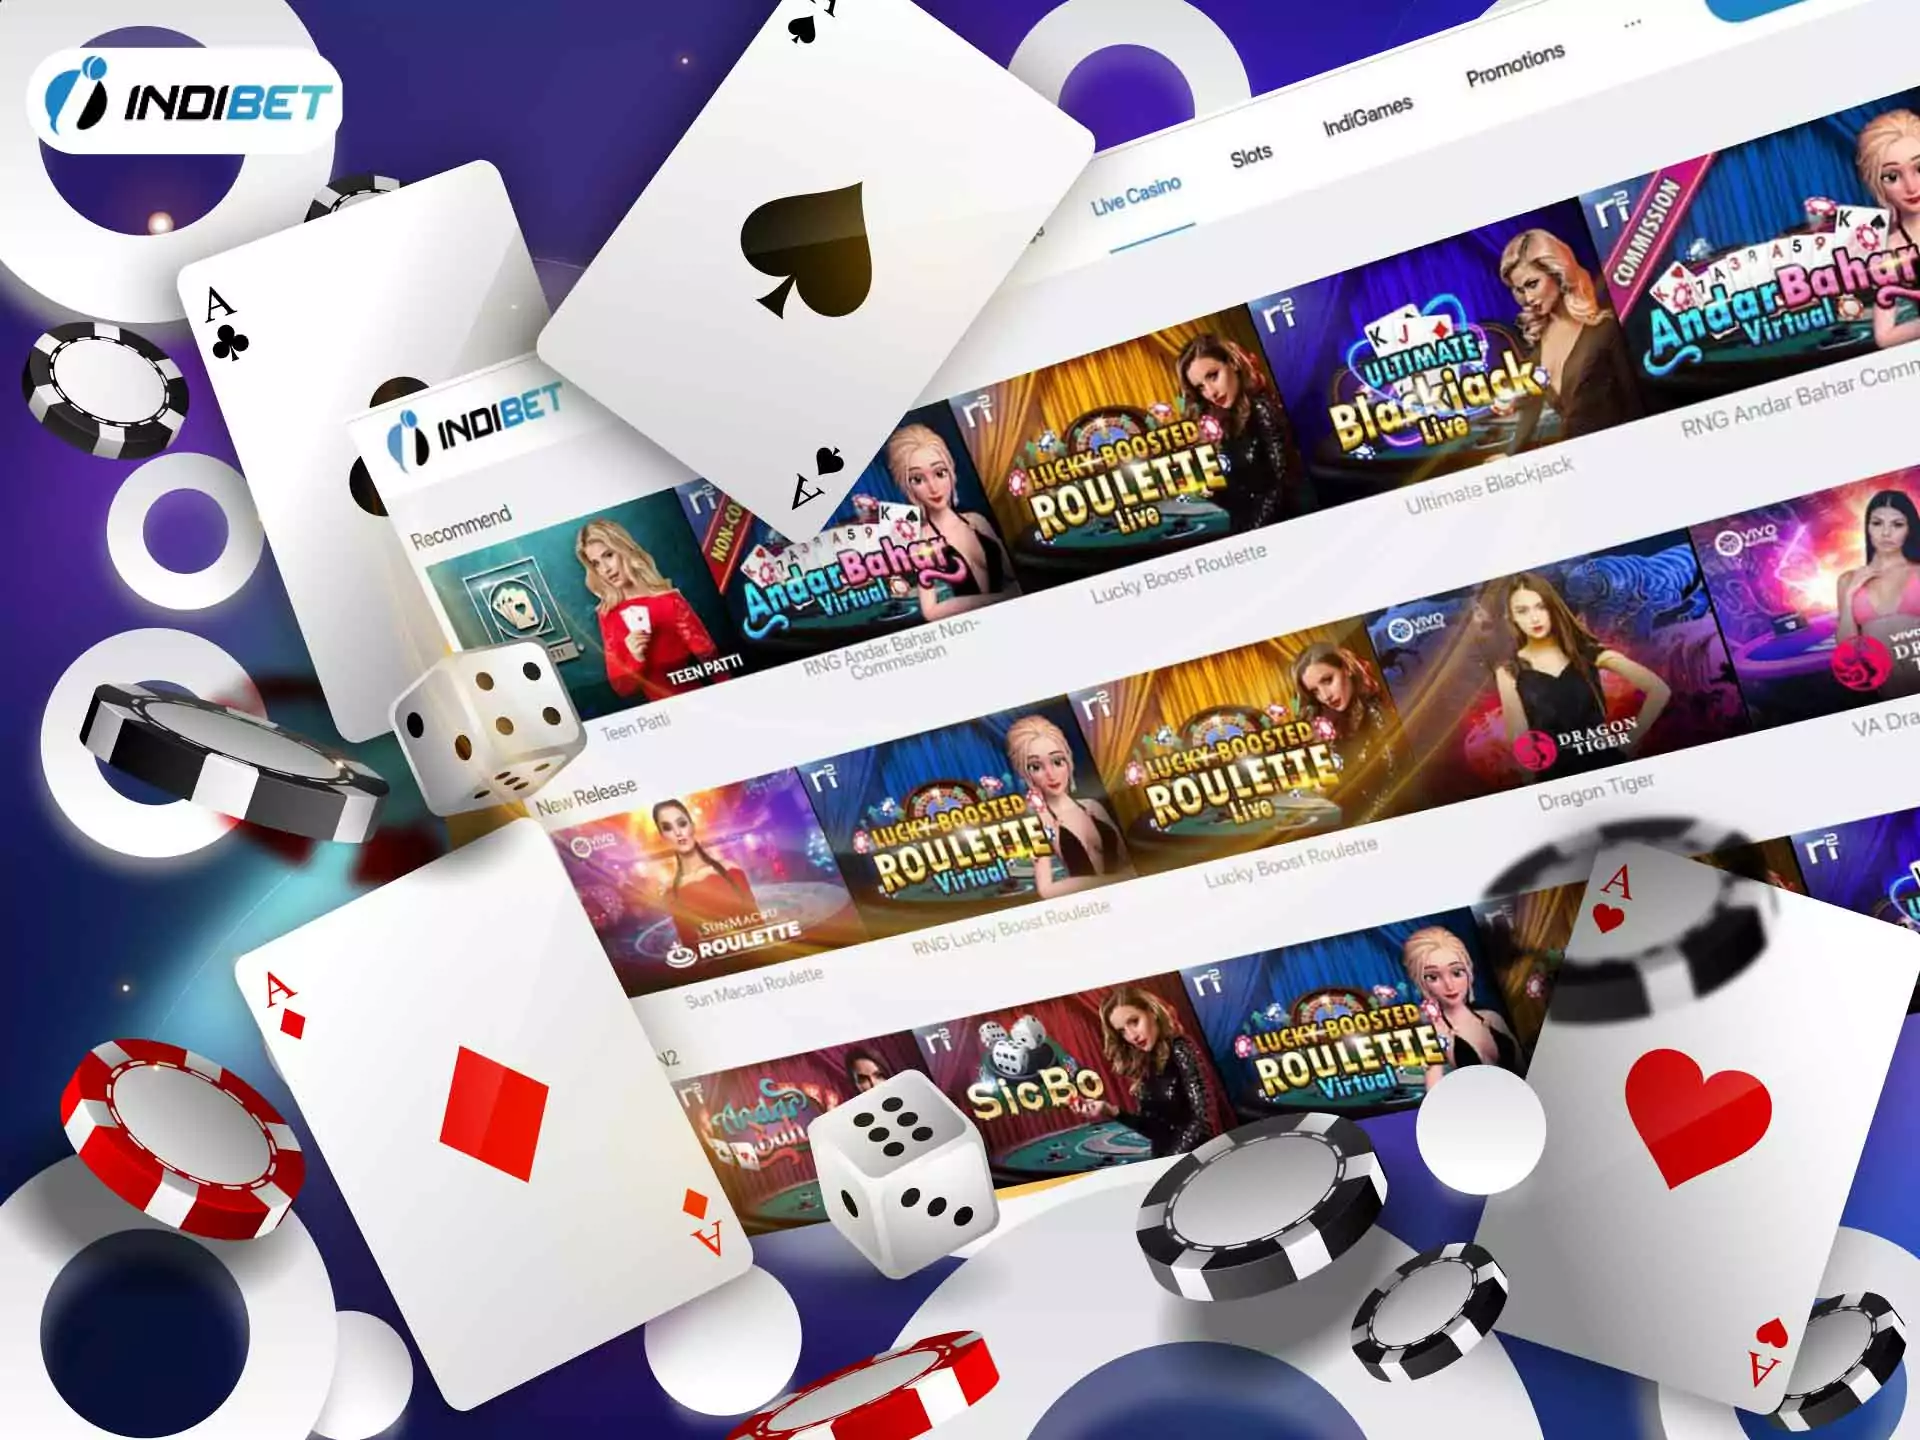 Play Texas Holdem, Omaha and other types of poker at Indibet.